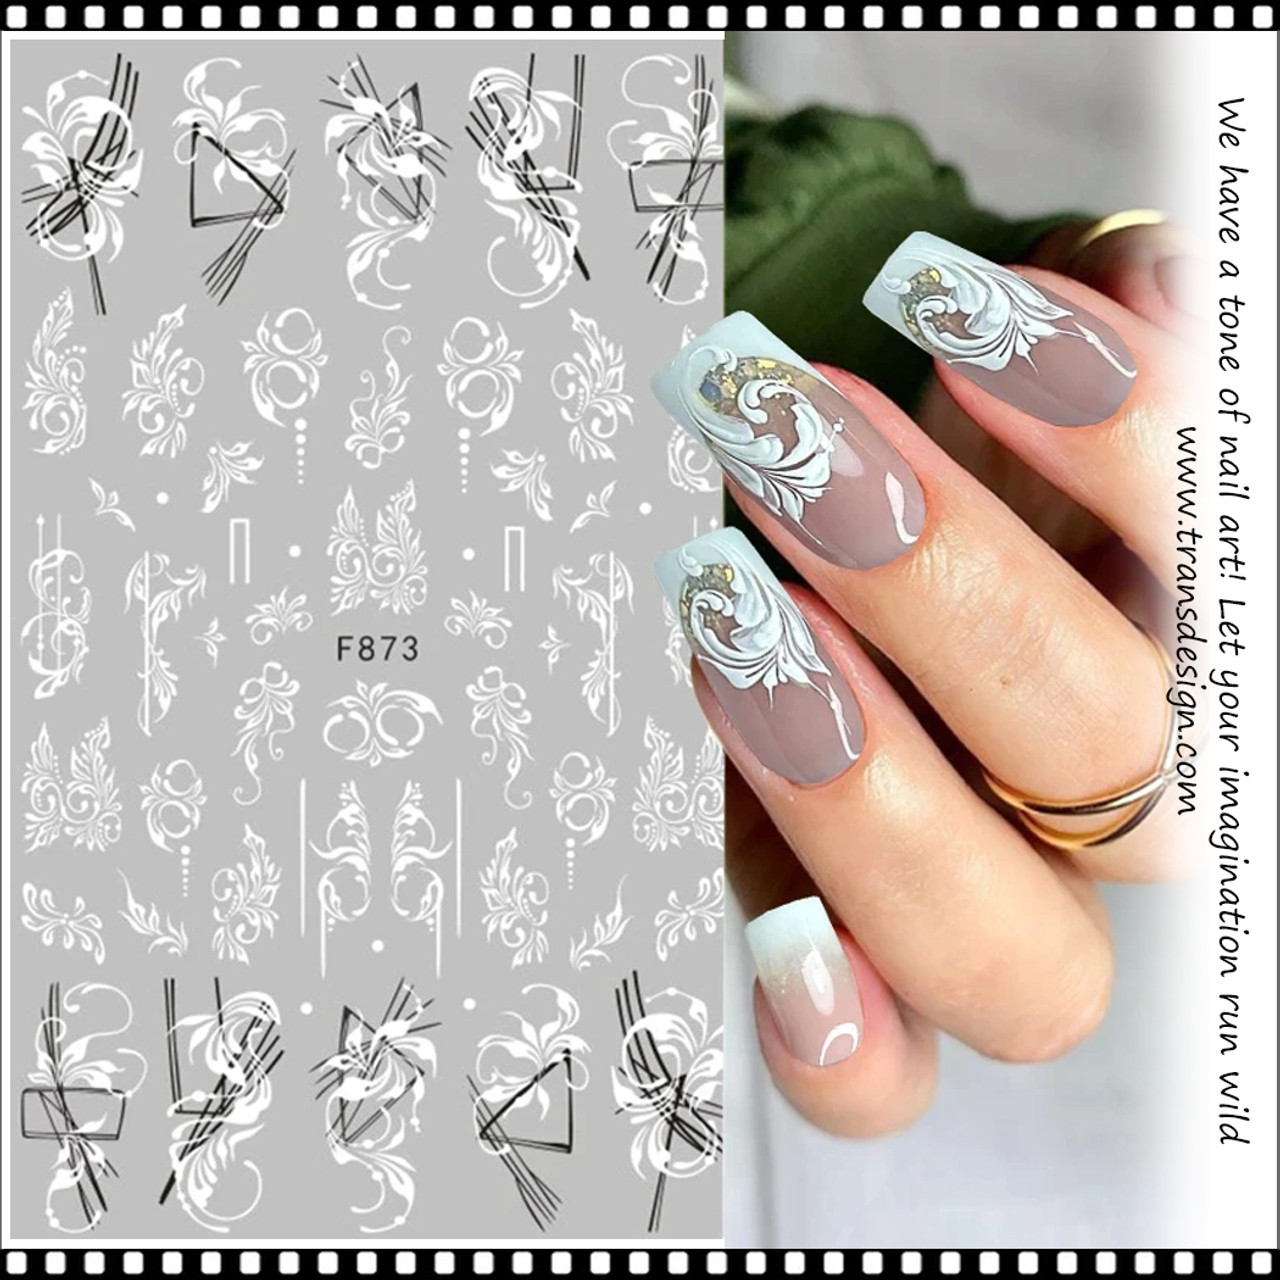 3D Nail Stickers Colorful Flowers Leaves Tropical Beach Nail Art